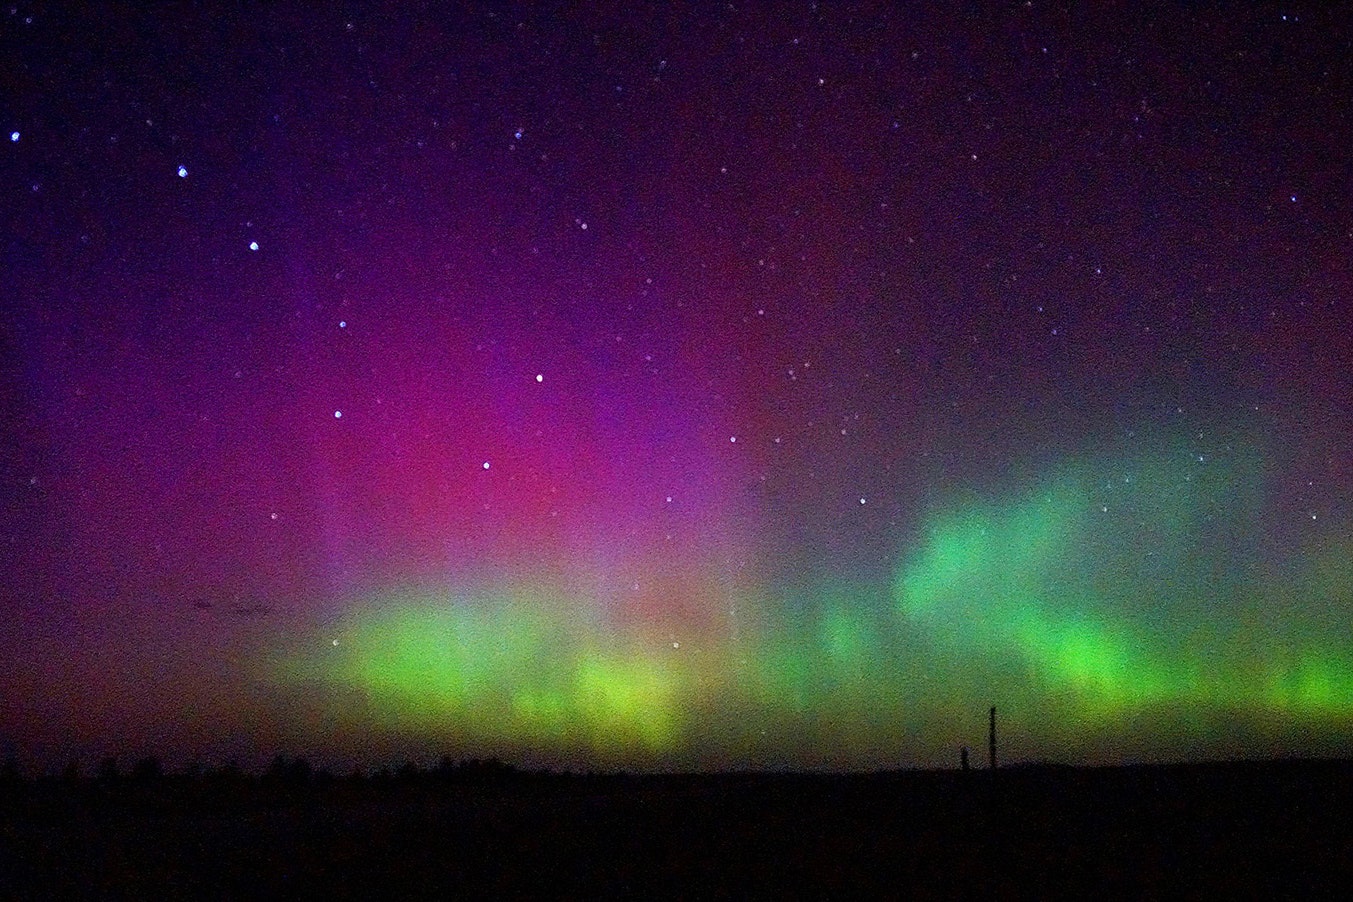 Marilyn Schmoker captured this photo of a rare Wyoming aurora borealis late Monday near her home of Newcastle.